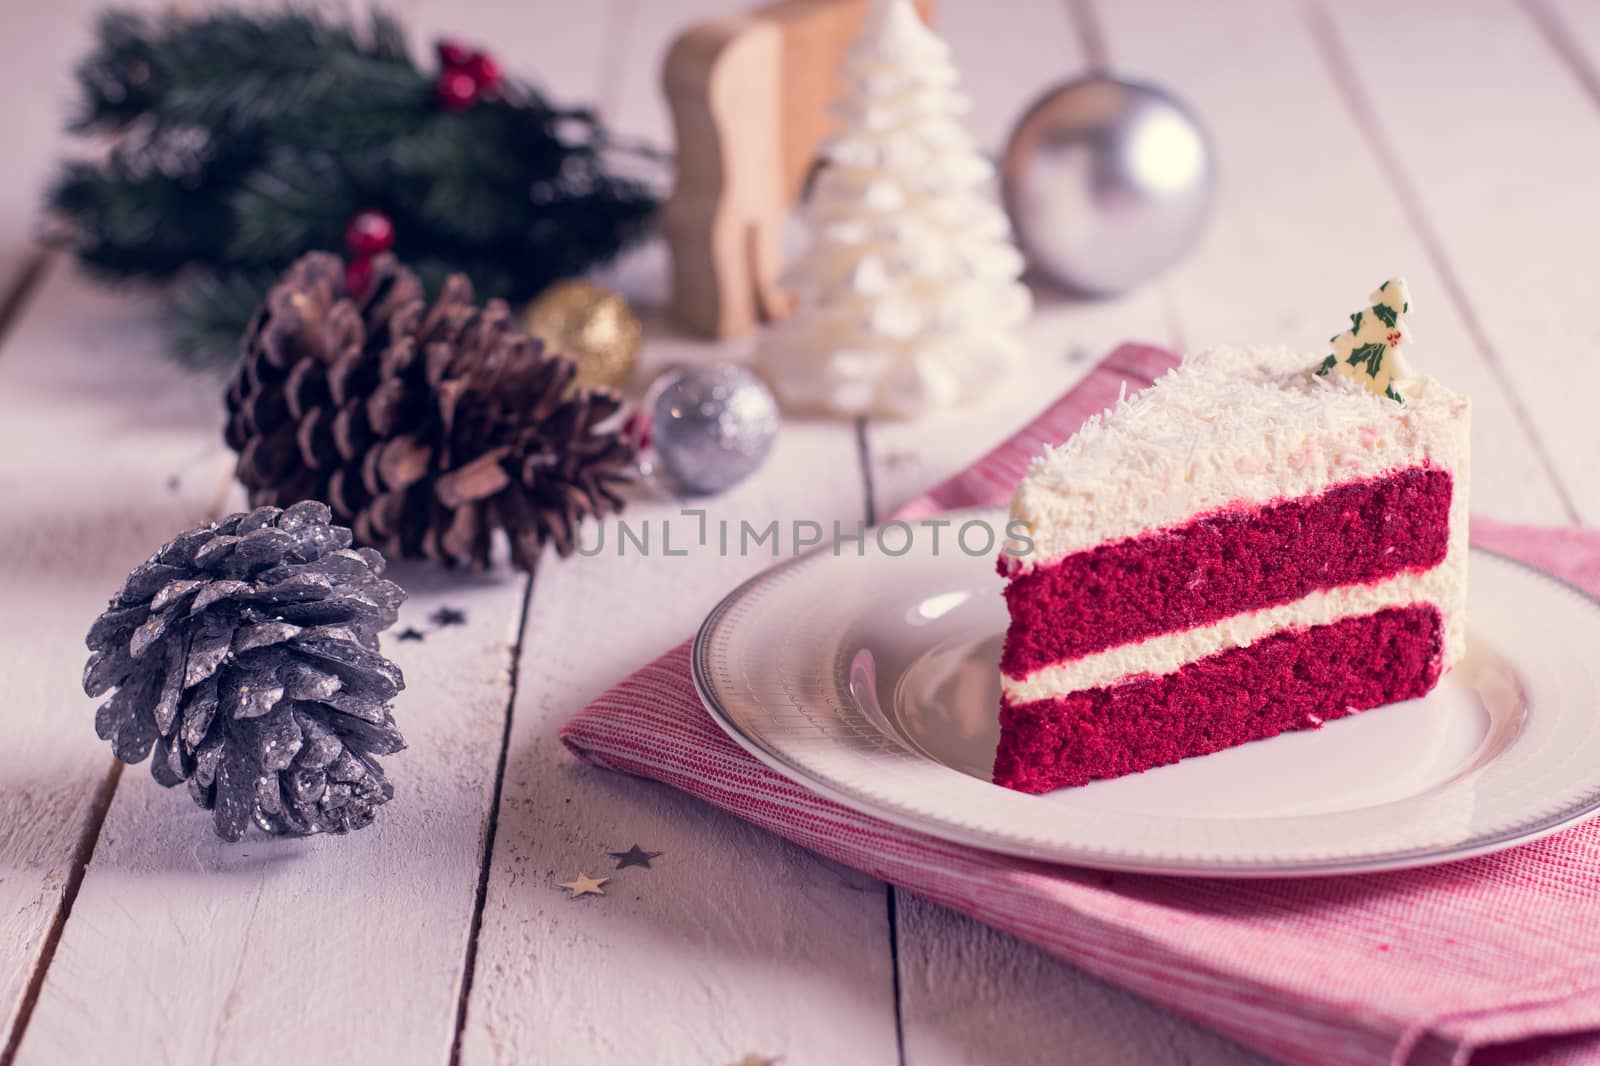 Christmas cake on plate on red fabric on wood background and decorations.